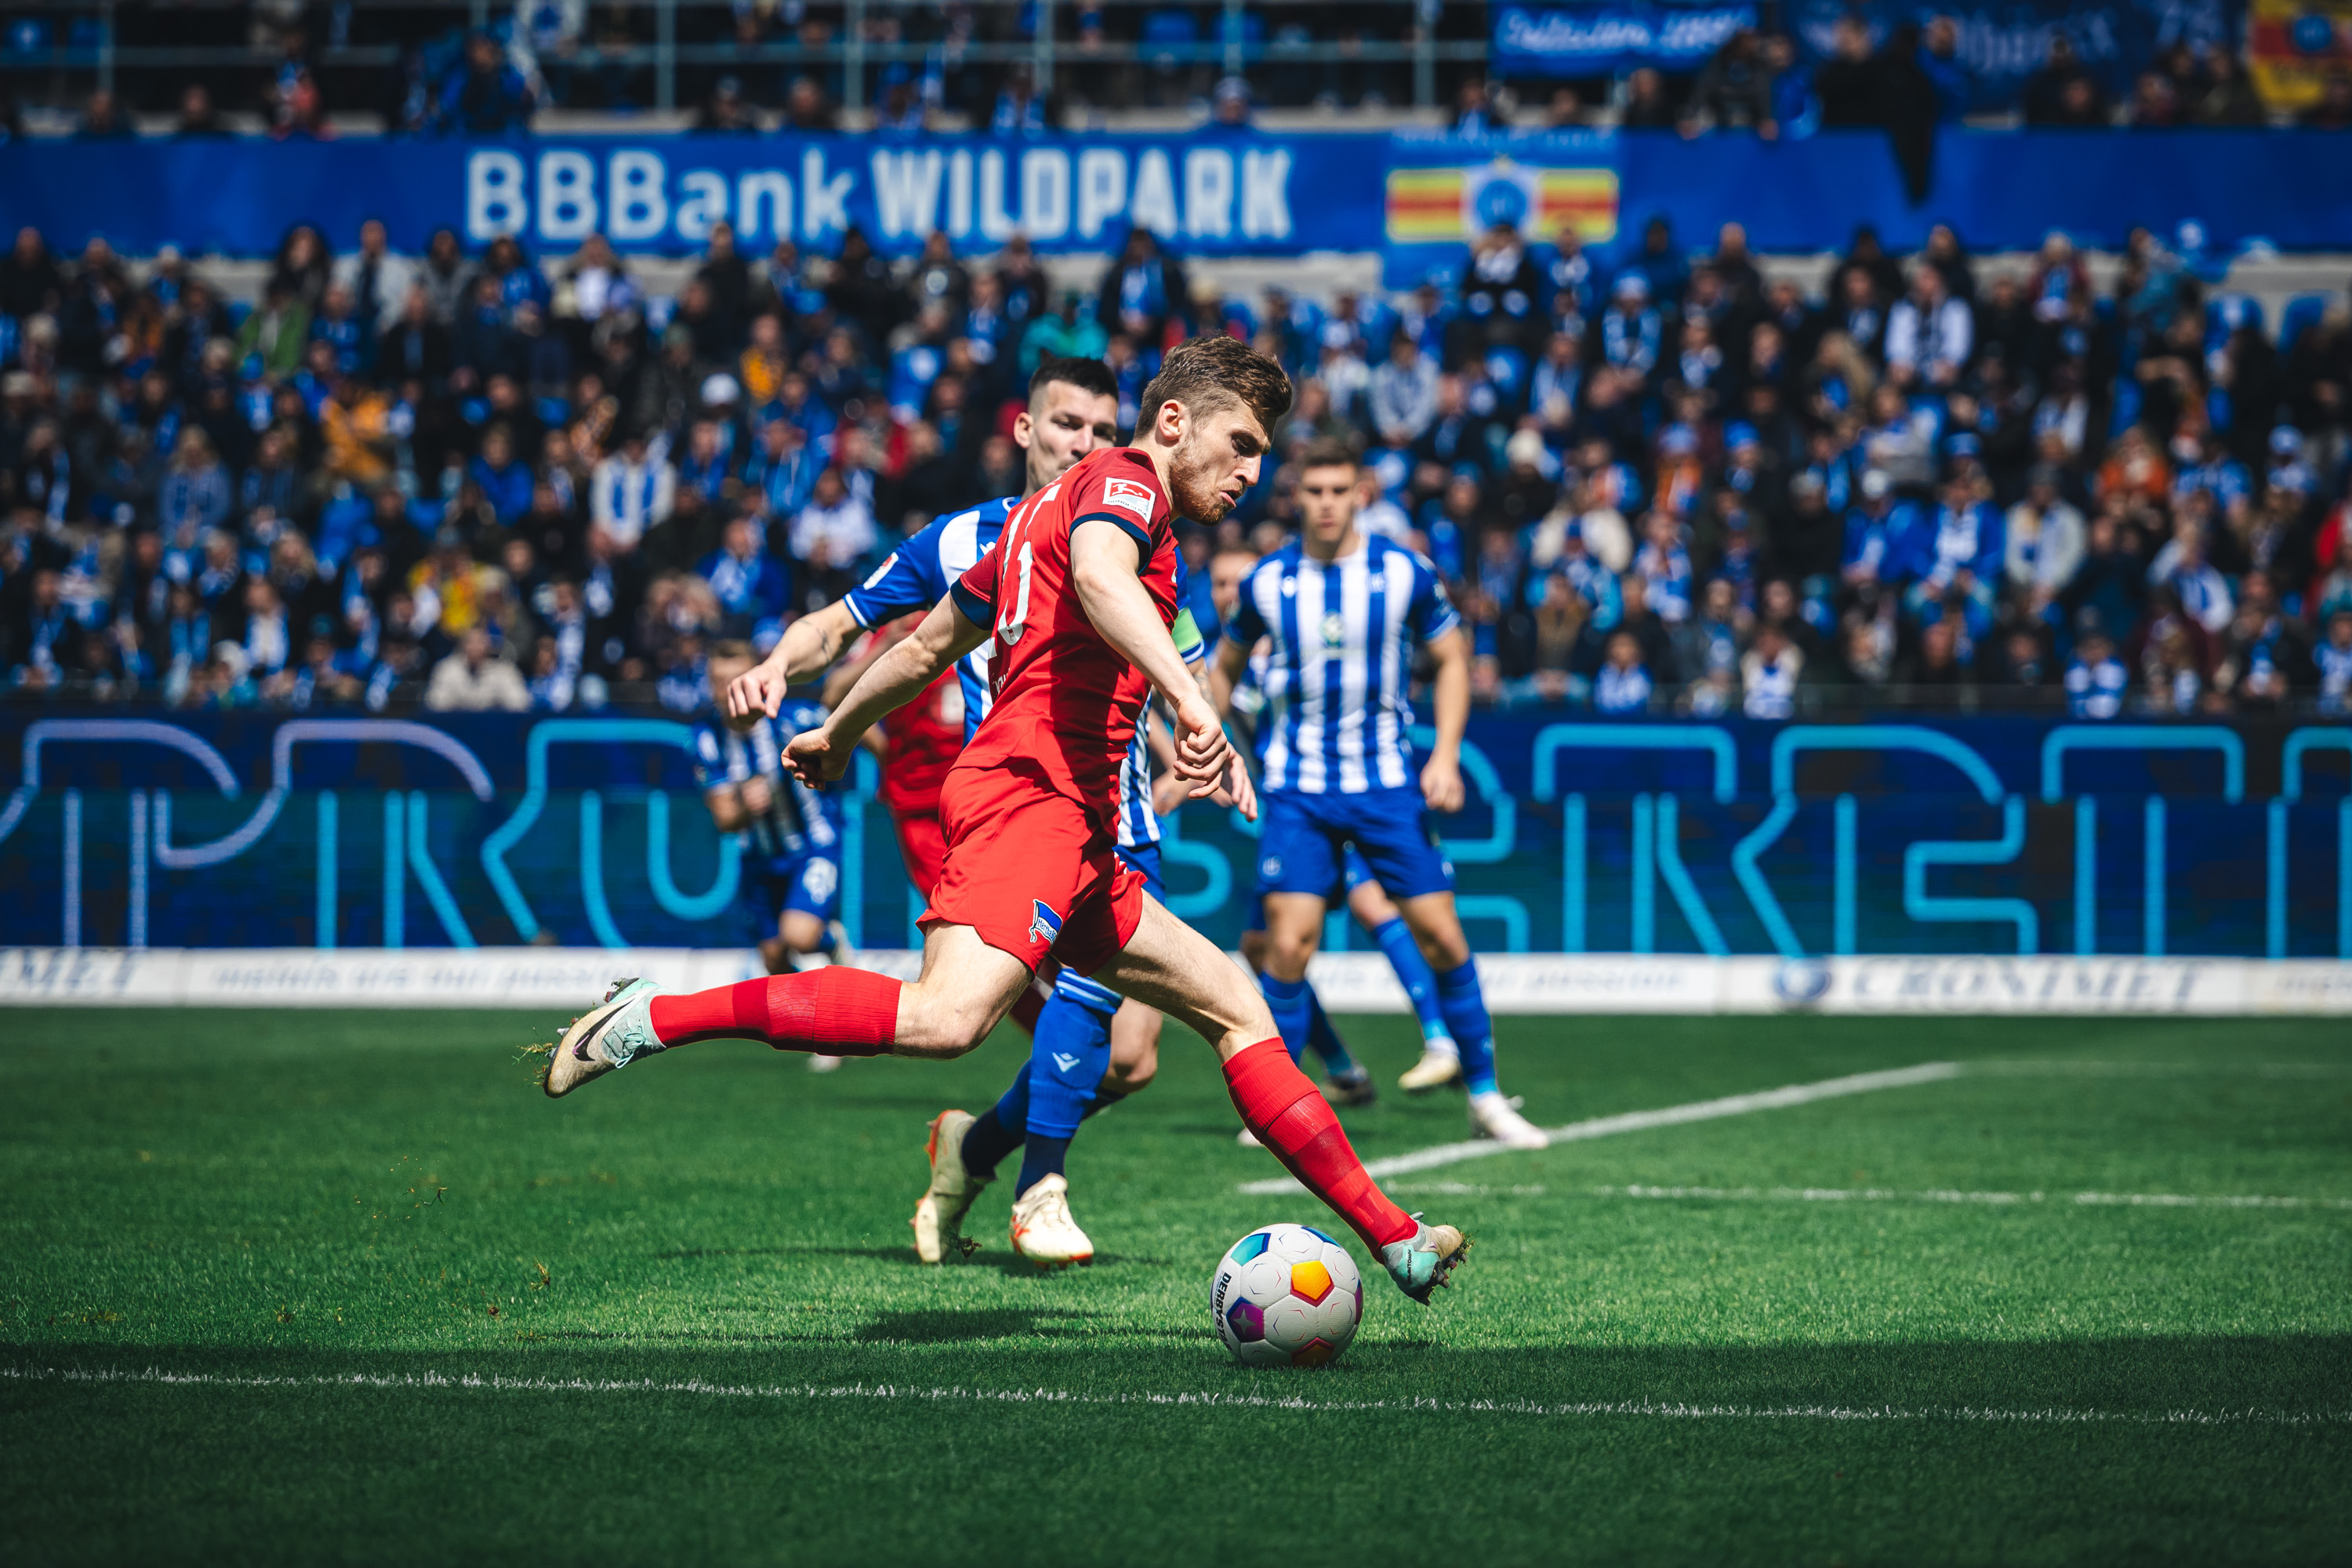 Jonjoe Kenny challenges for the ball against Karlsruhe.